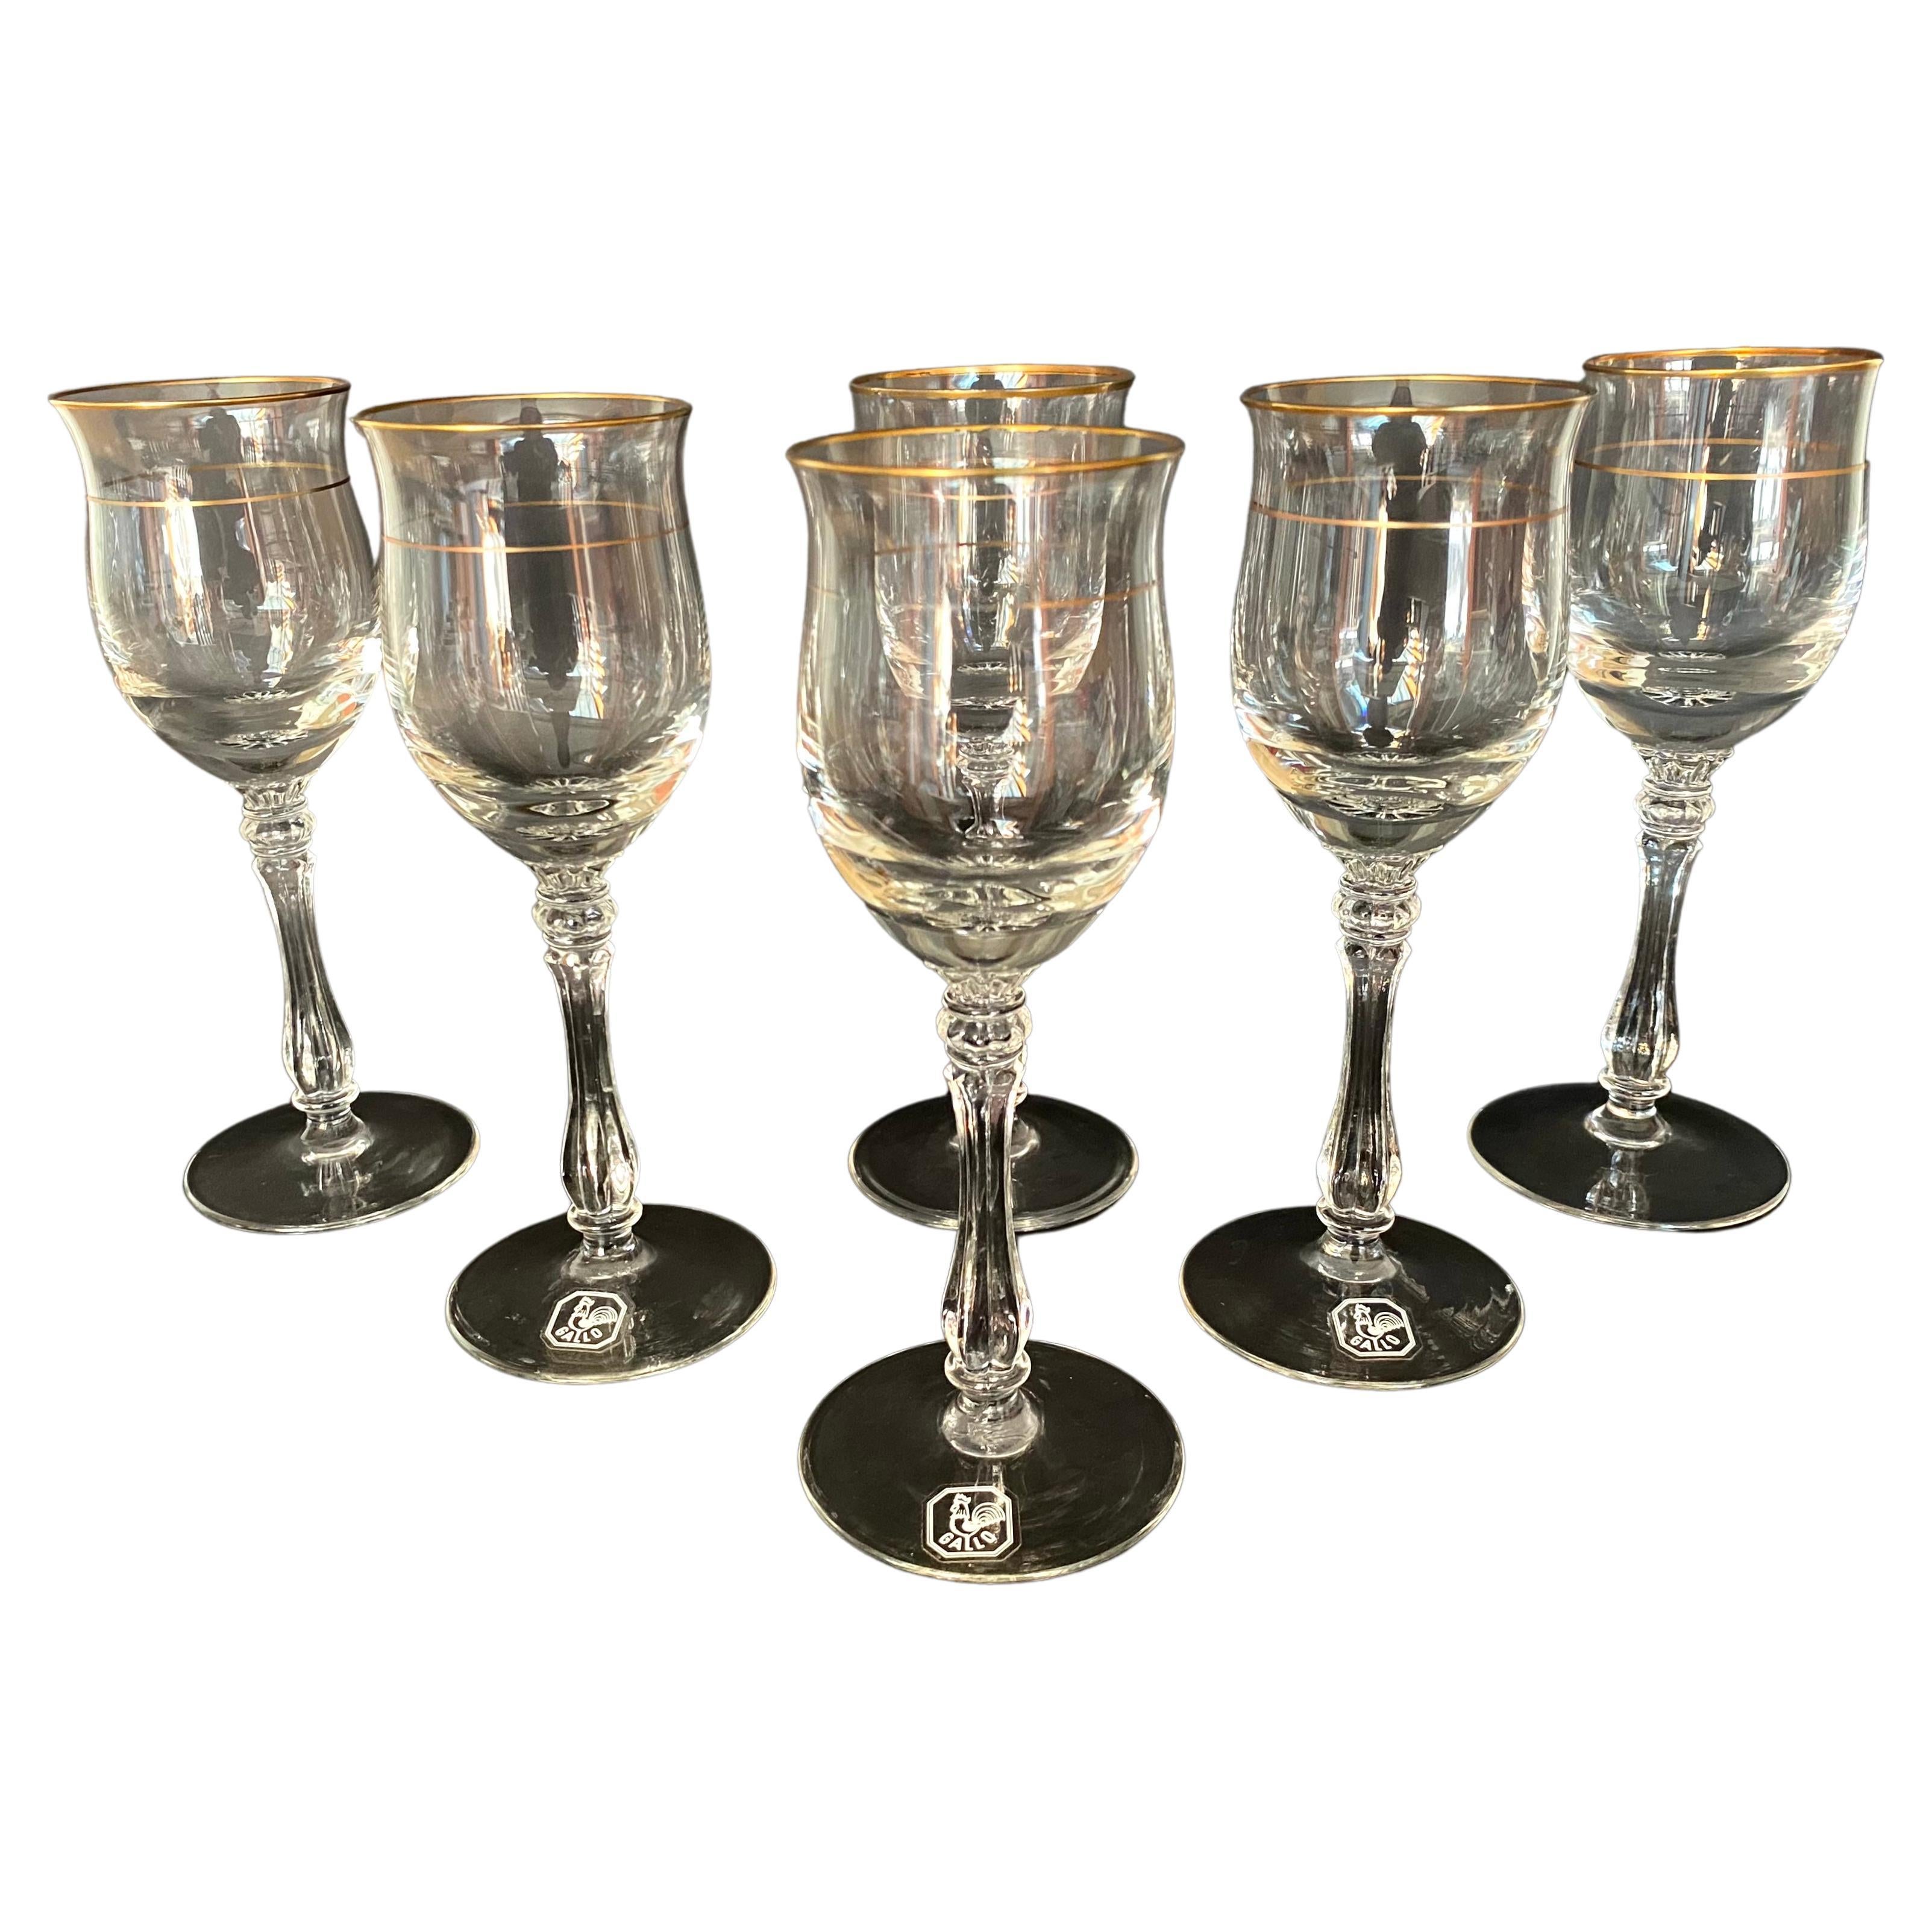 Charming Vintage Set of 6 Crystal Cognac Glasses by Gallo, Germany, 1970s